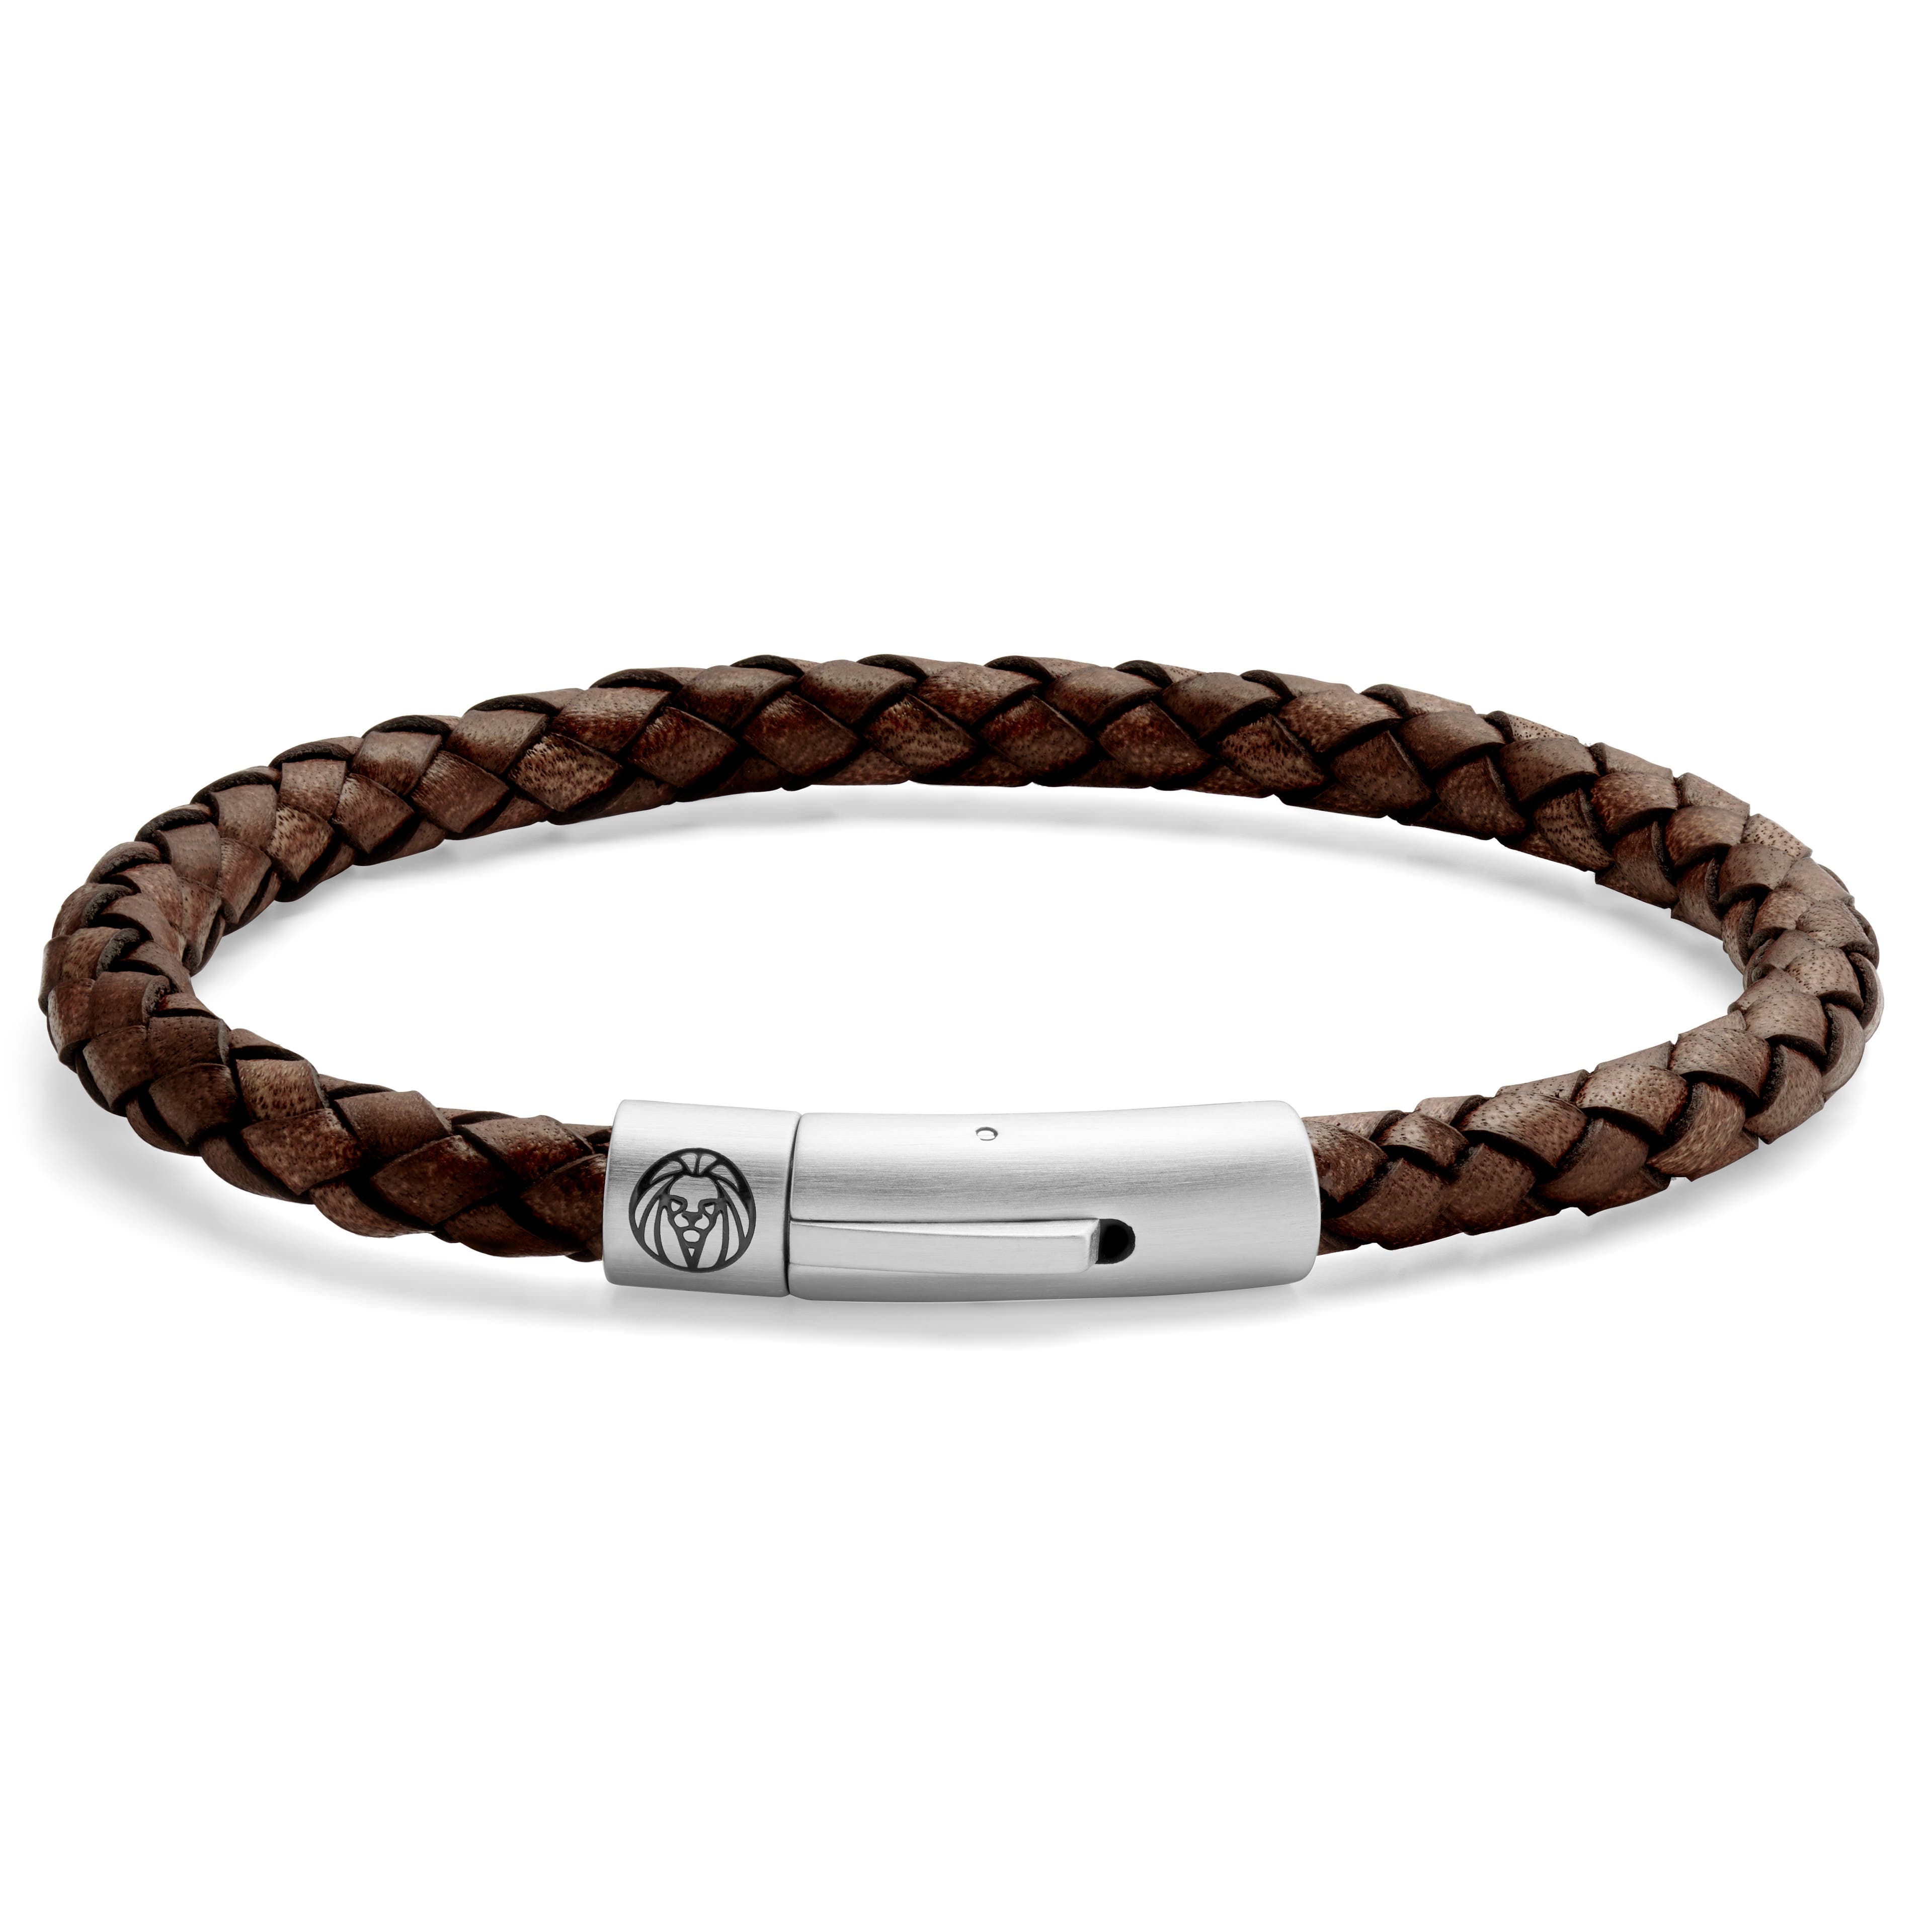 Brown Leather Bracelet, Stainless Steel Clasp, Genuine 8mm Braided Leather Cord, Mens Bracelet